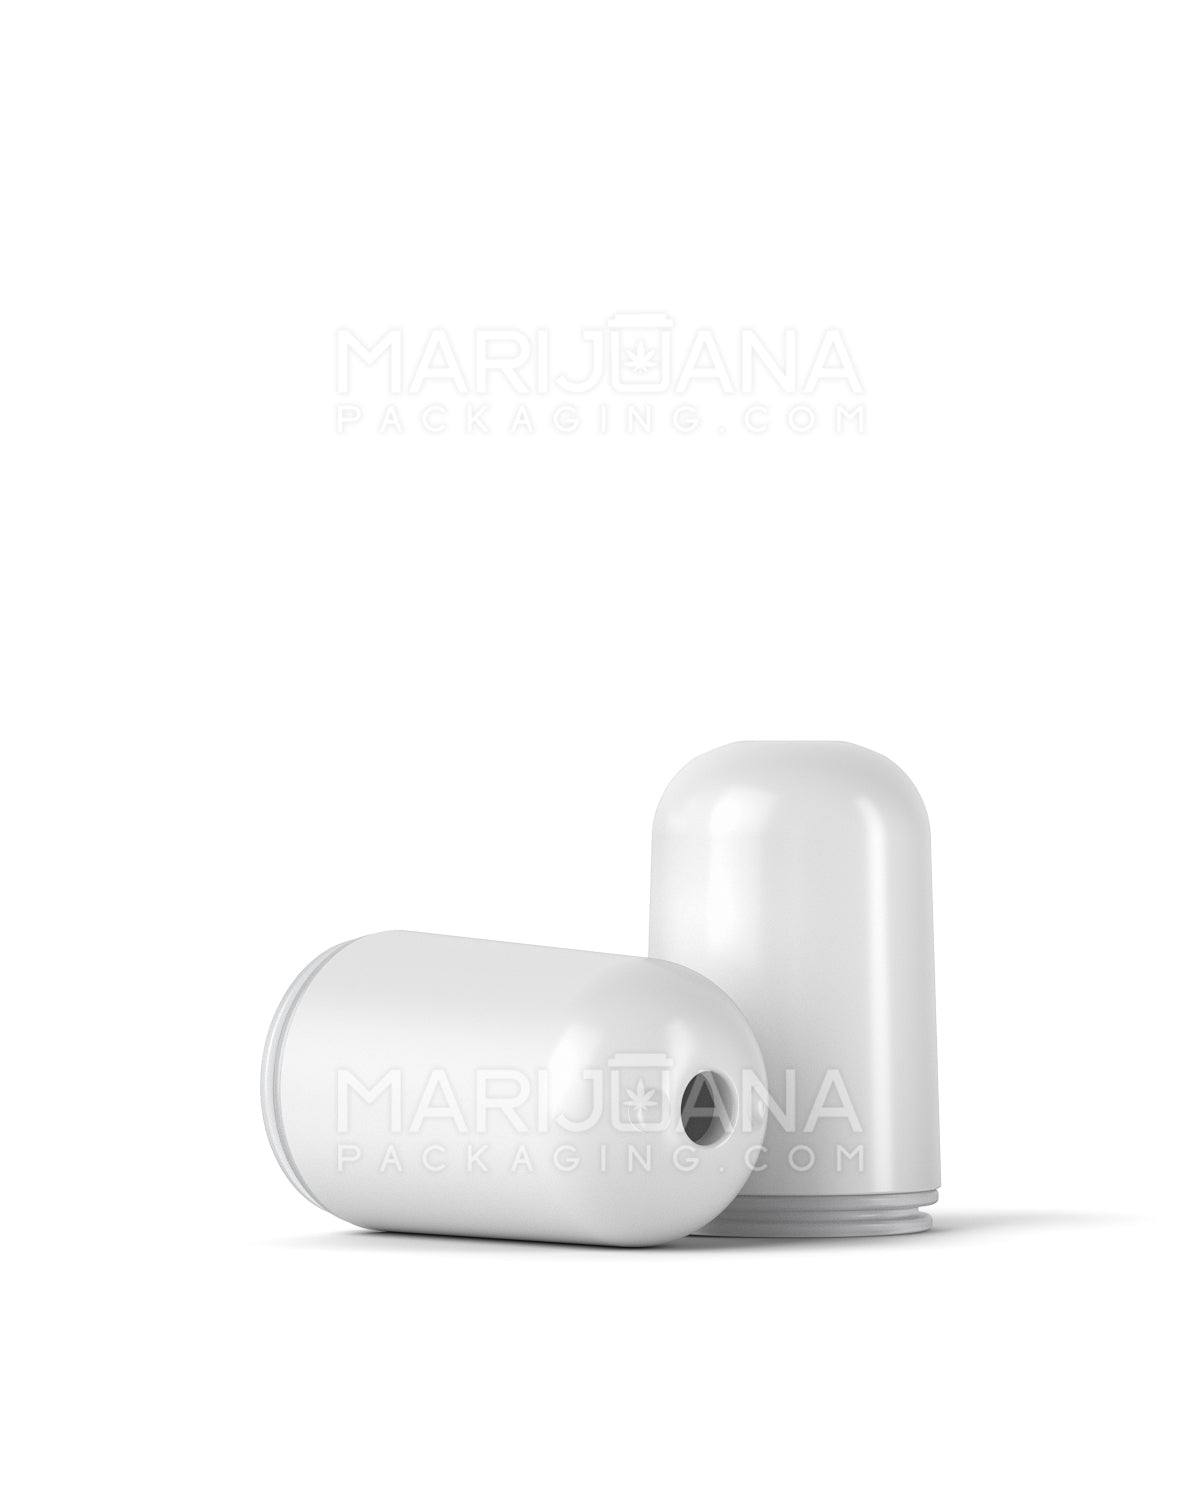 AVD | Round Vape Mouthpiece for Glass Cartridges | White Plastic - Screw On - 600 Count - 1